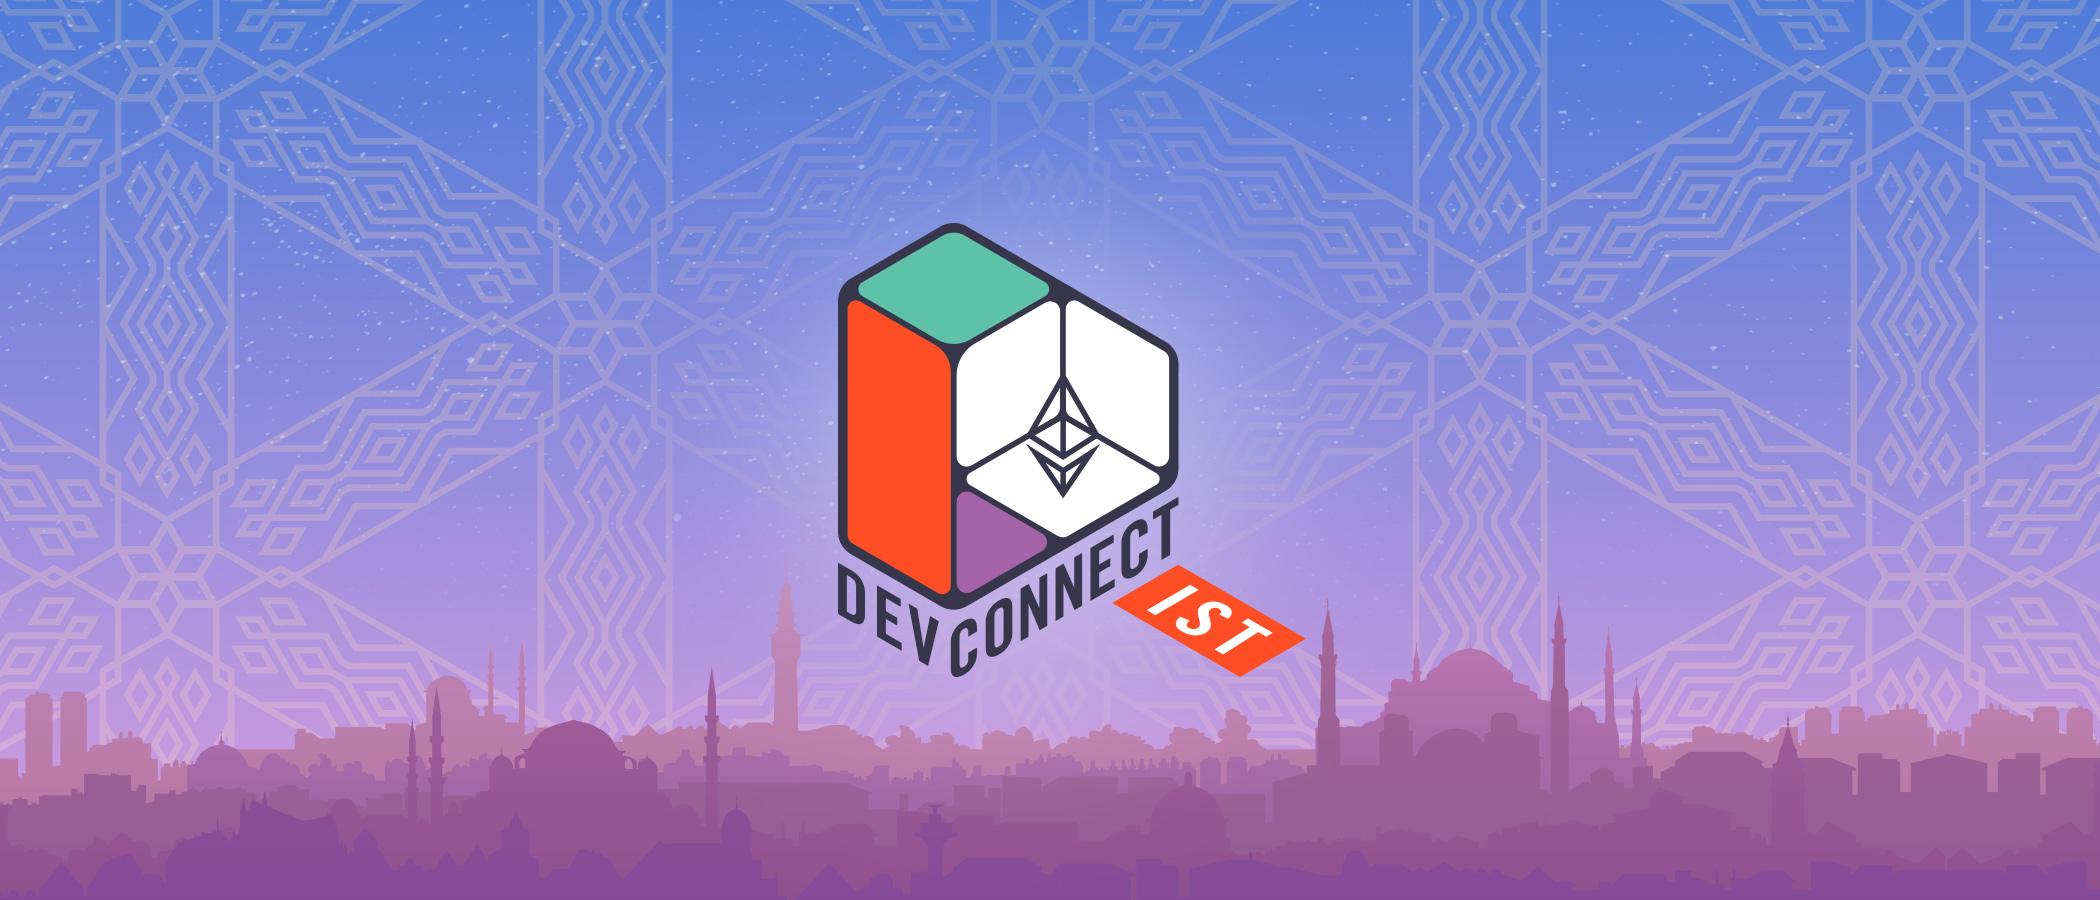 Devconnect is back! See you this year in Istanbul.